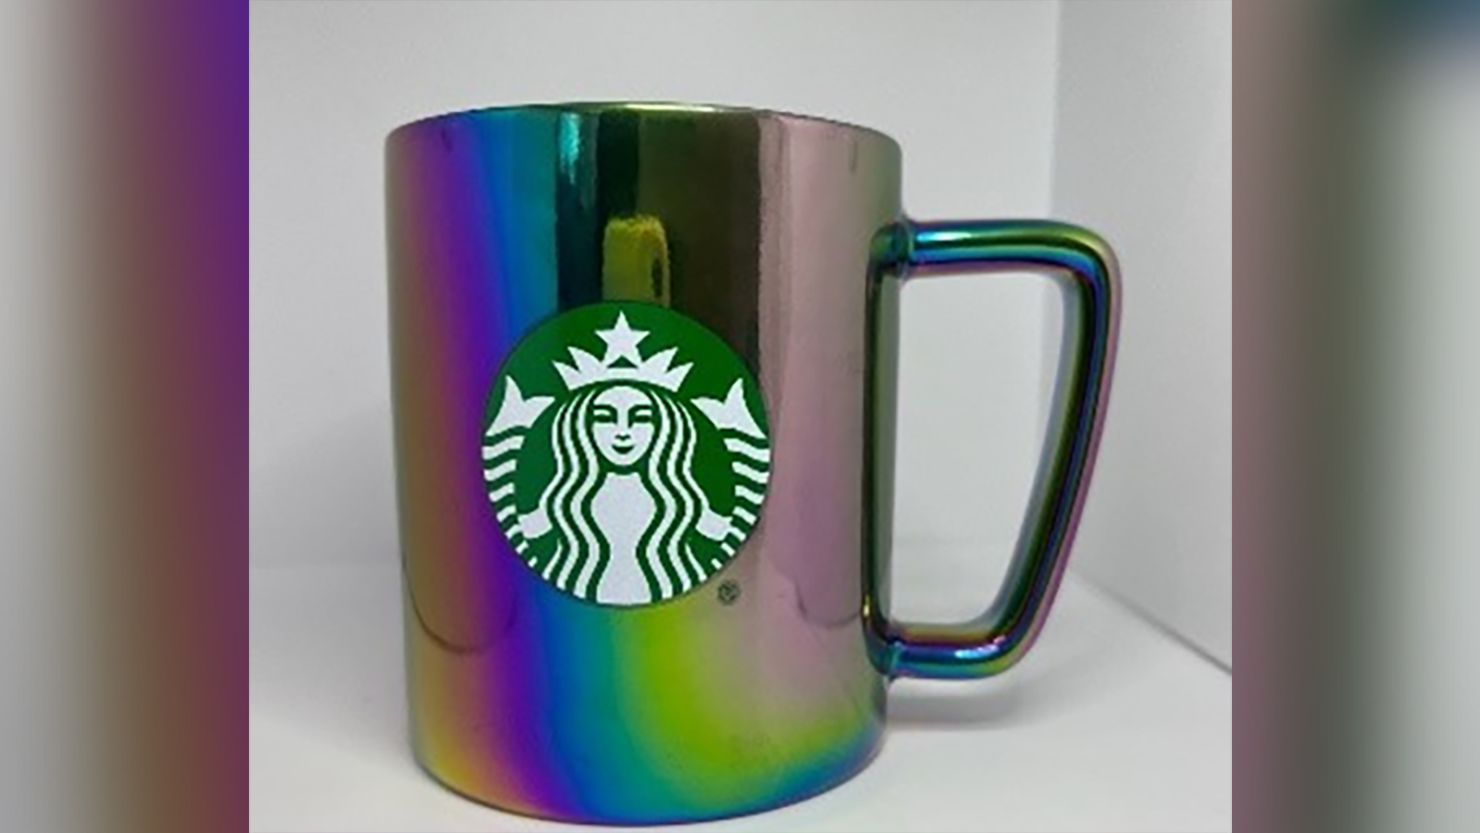 Recalled Starbucks Holiday Gift Set with 2 Mugs (Close-up of Mug). The US Consumer Product Safety Commission said the mugs can overheat or break.